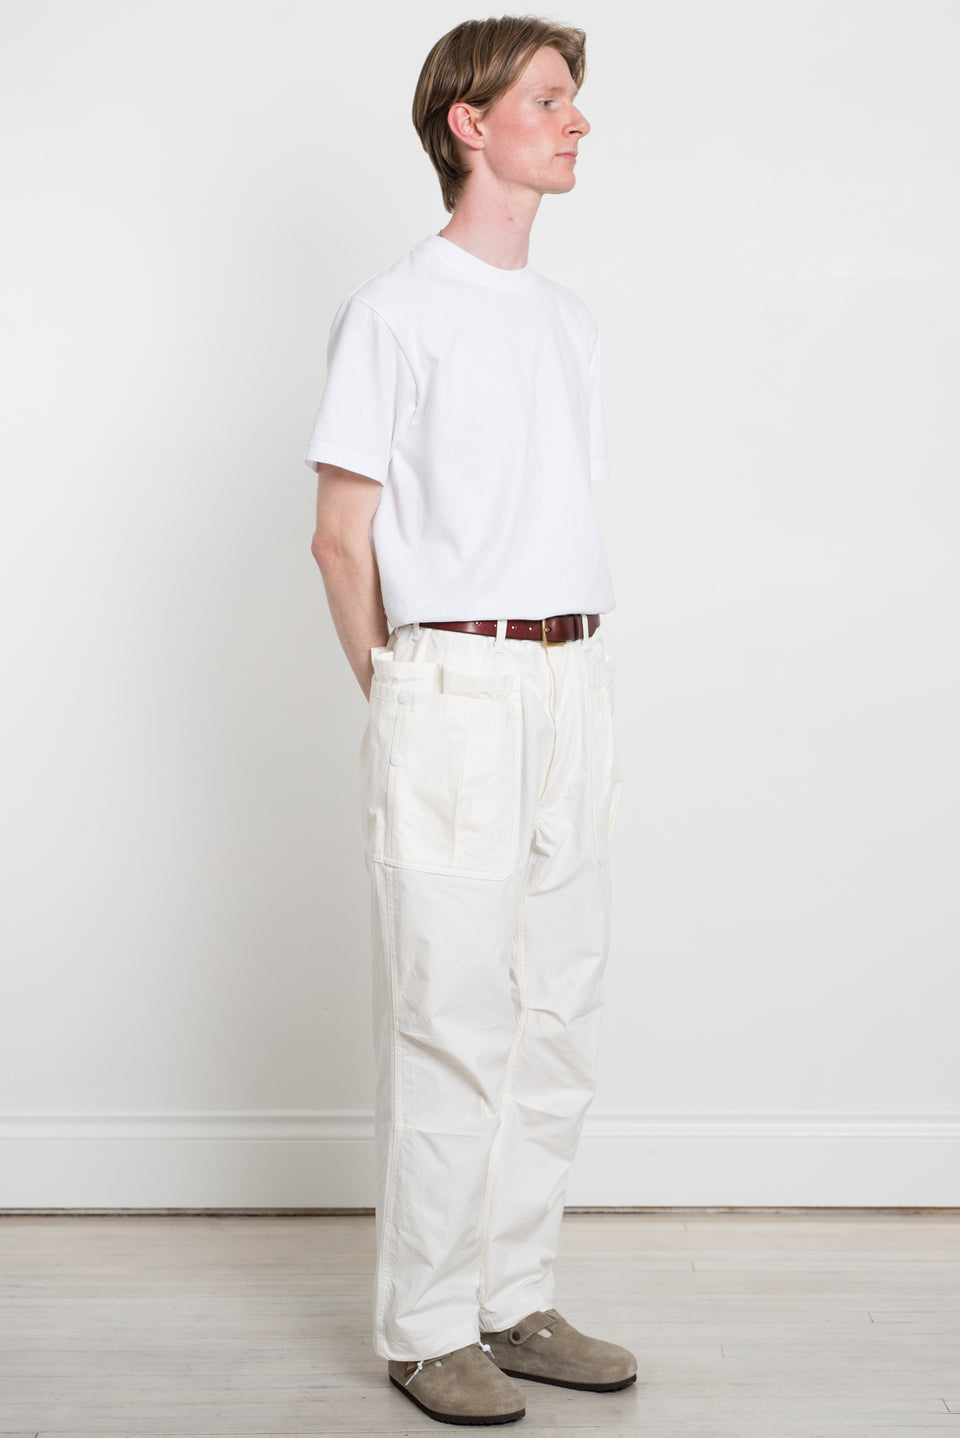 Sassafras SS23 Made in Japan SF-232011 Overgrown Hiker Pants White Calculus Victoria BC Canada